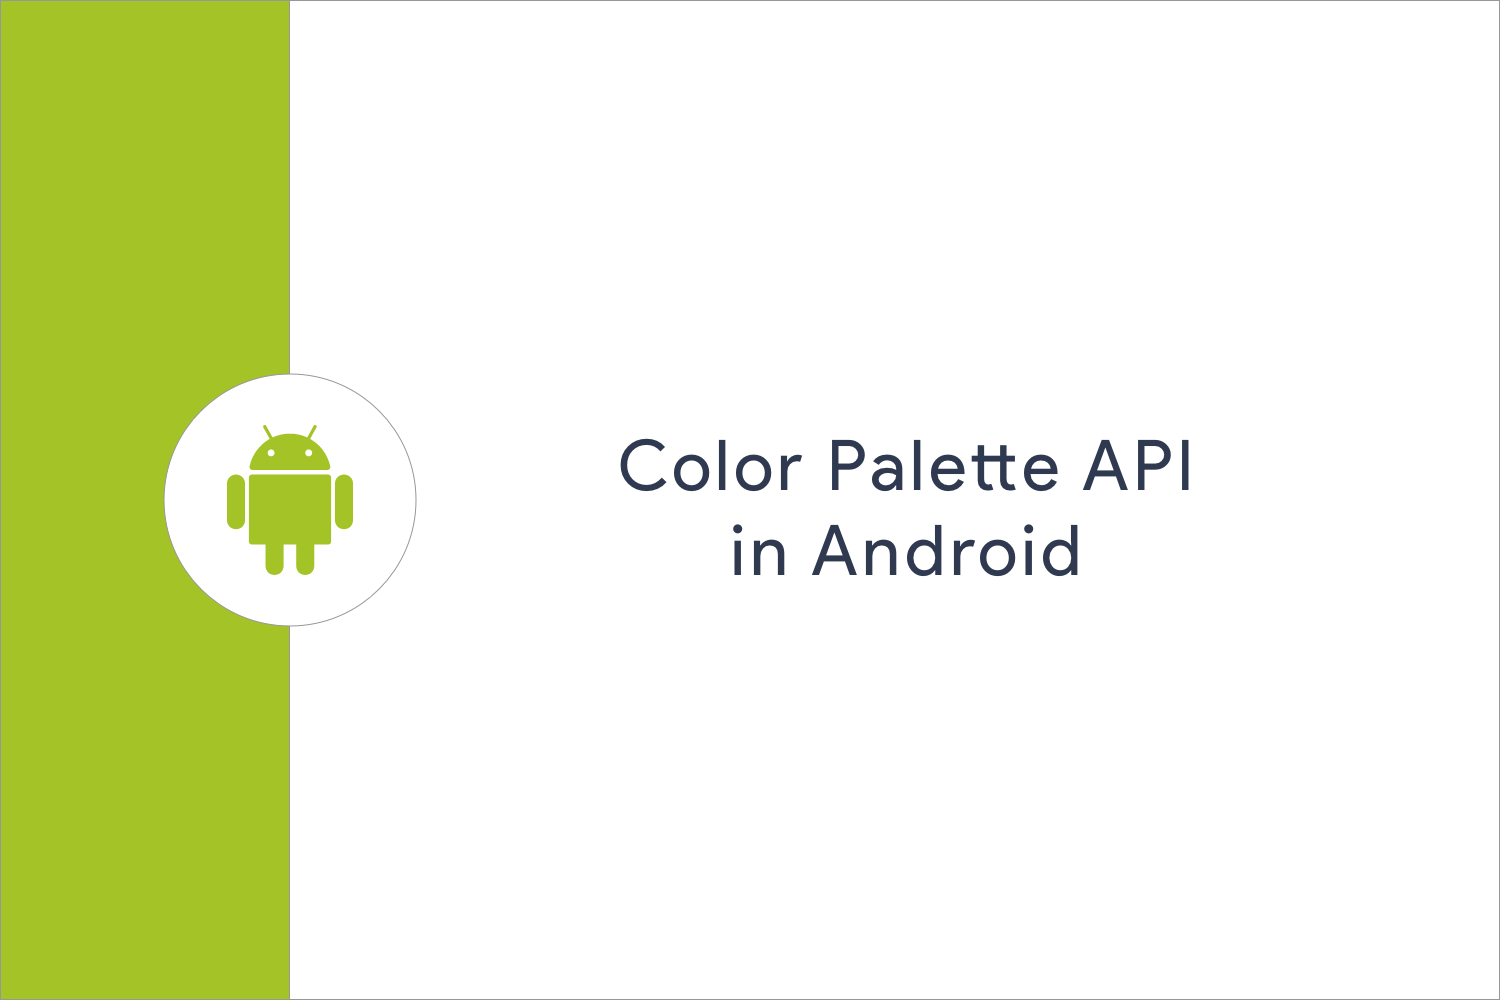 Color Palette API in Android